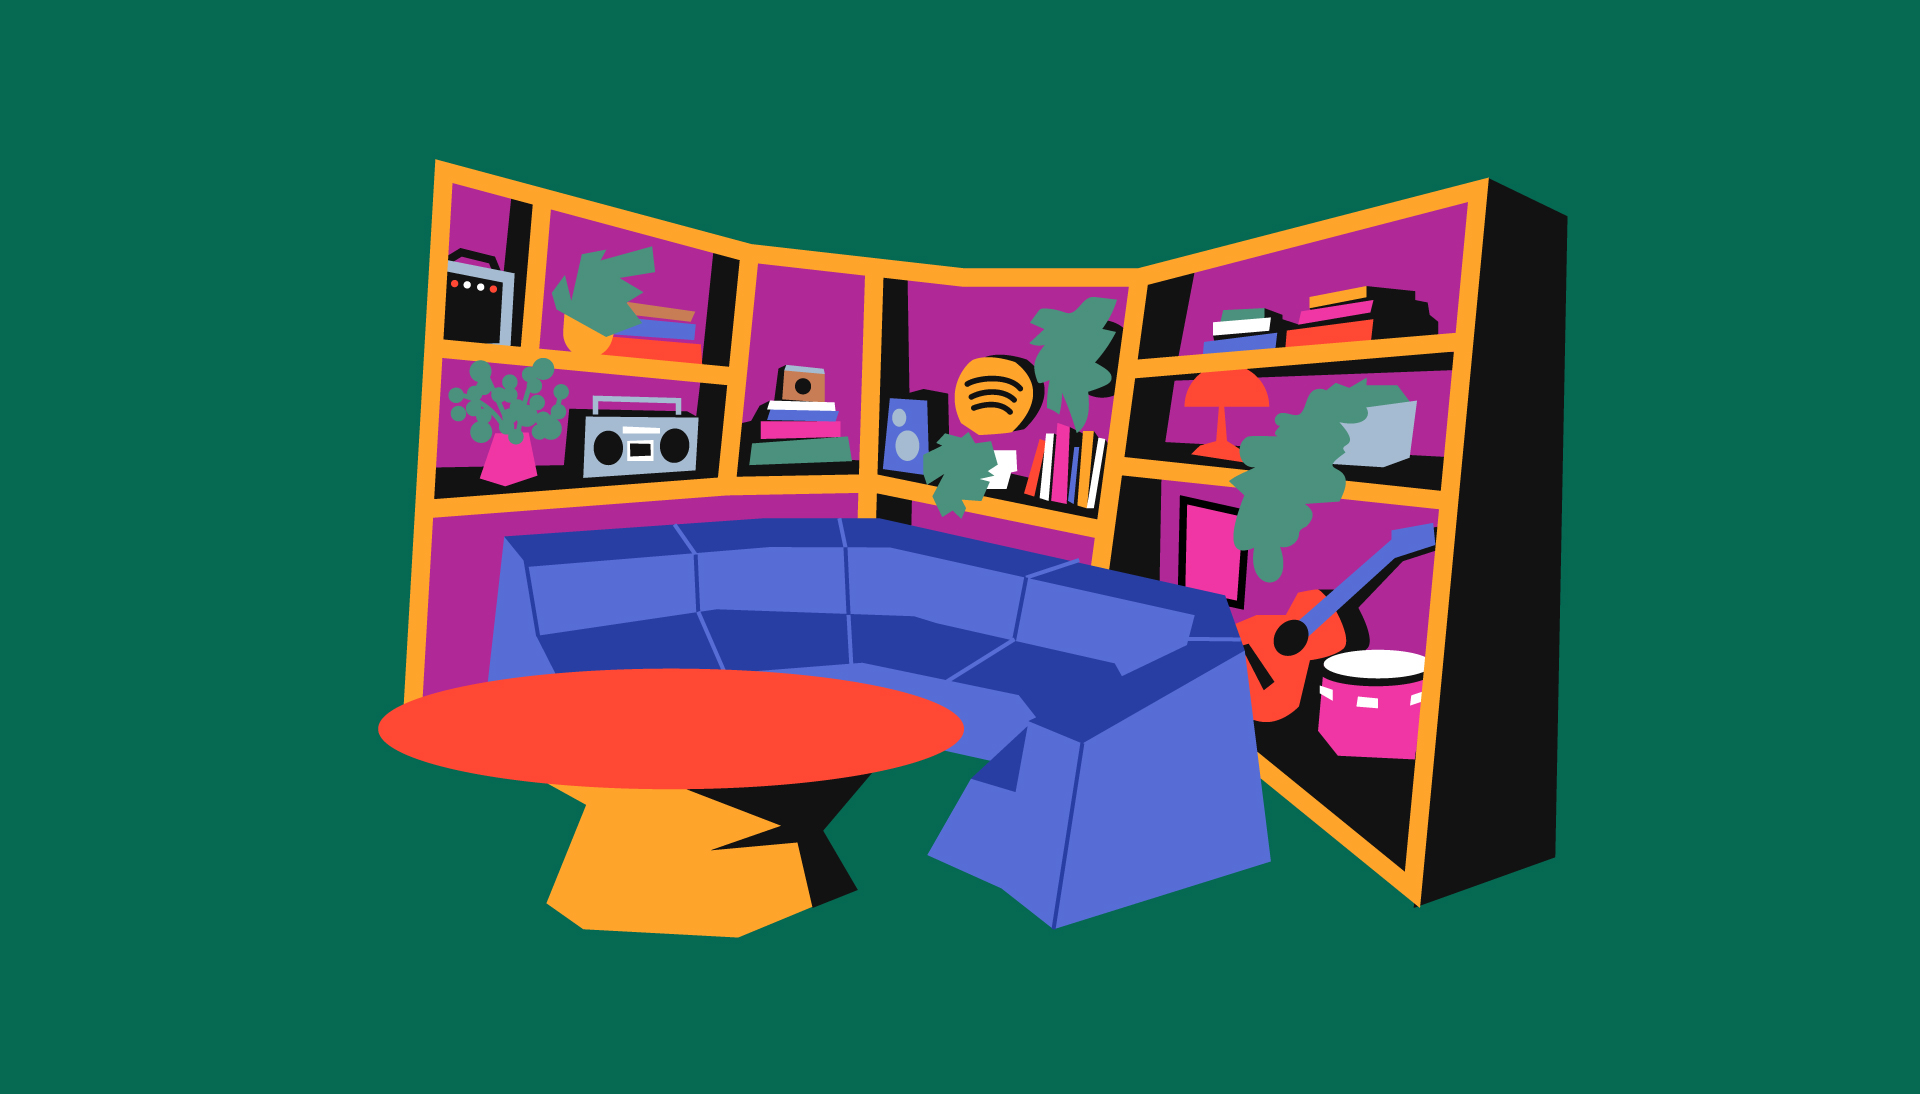 illustration of a podcast studio with a couch booth and bookshelves